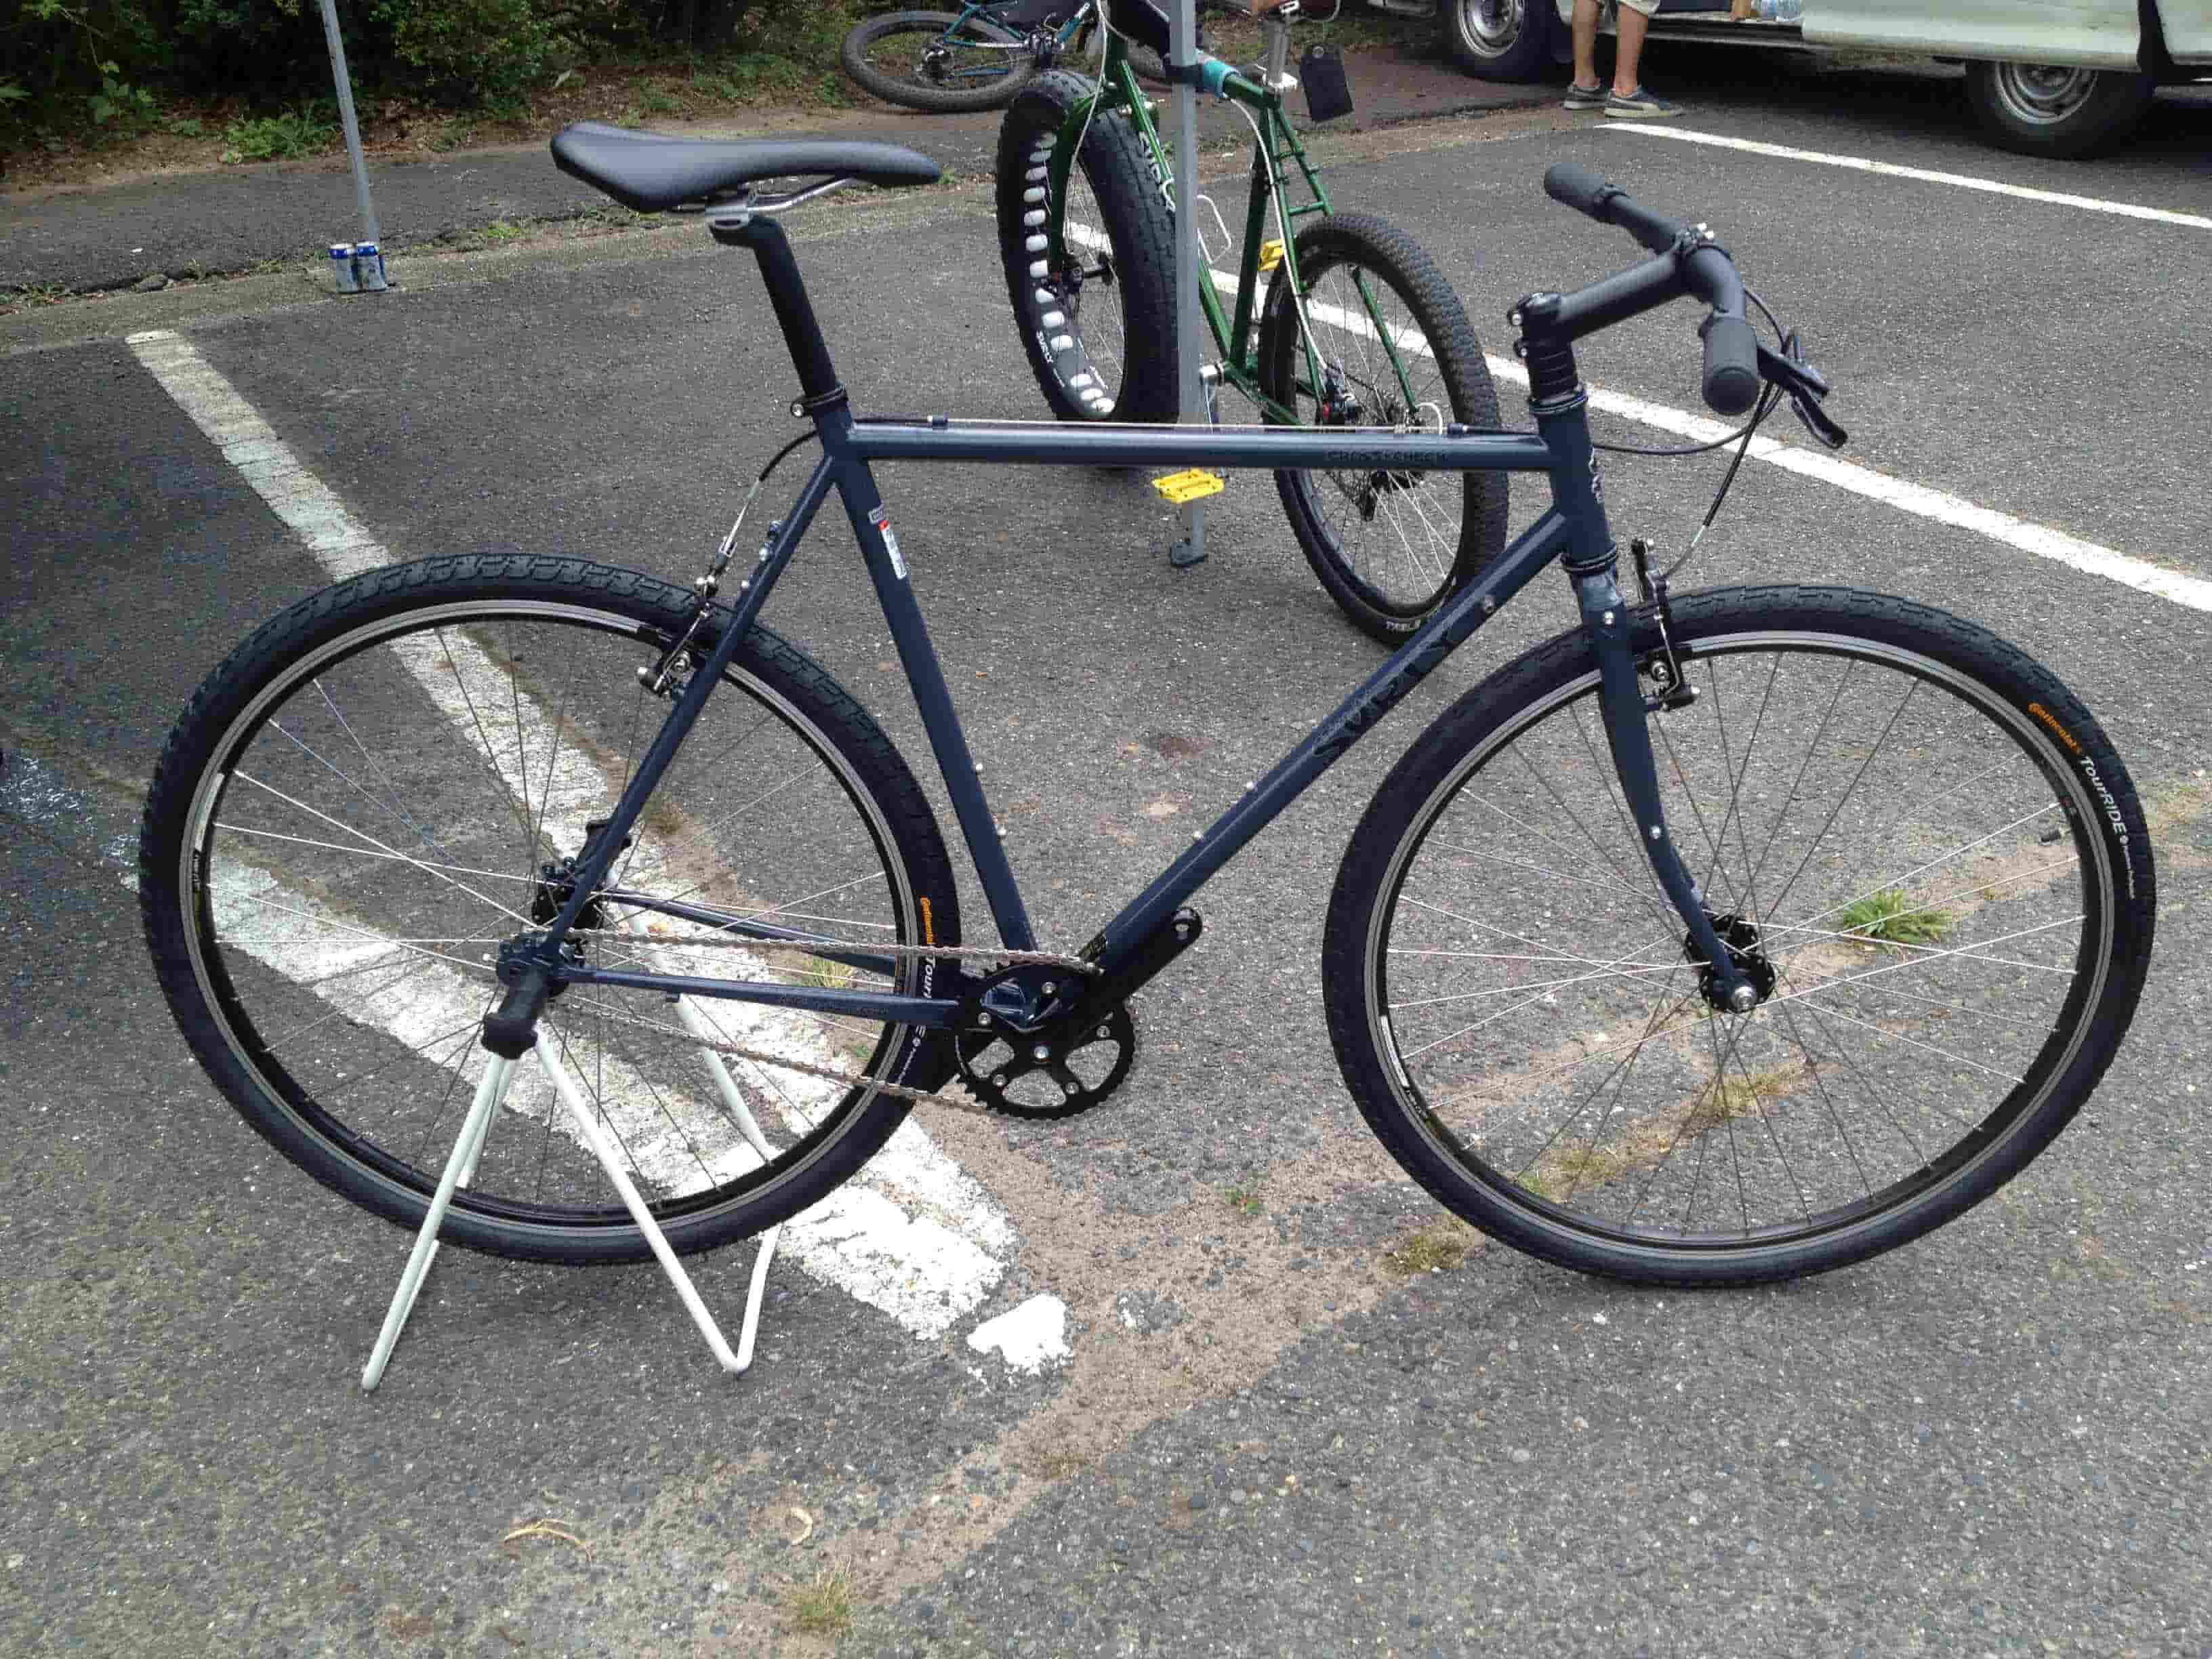 Right side view of a dark blue Surly Cross Check bike, standing across a paved parking lot spot, with a bike behind it